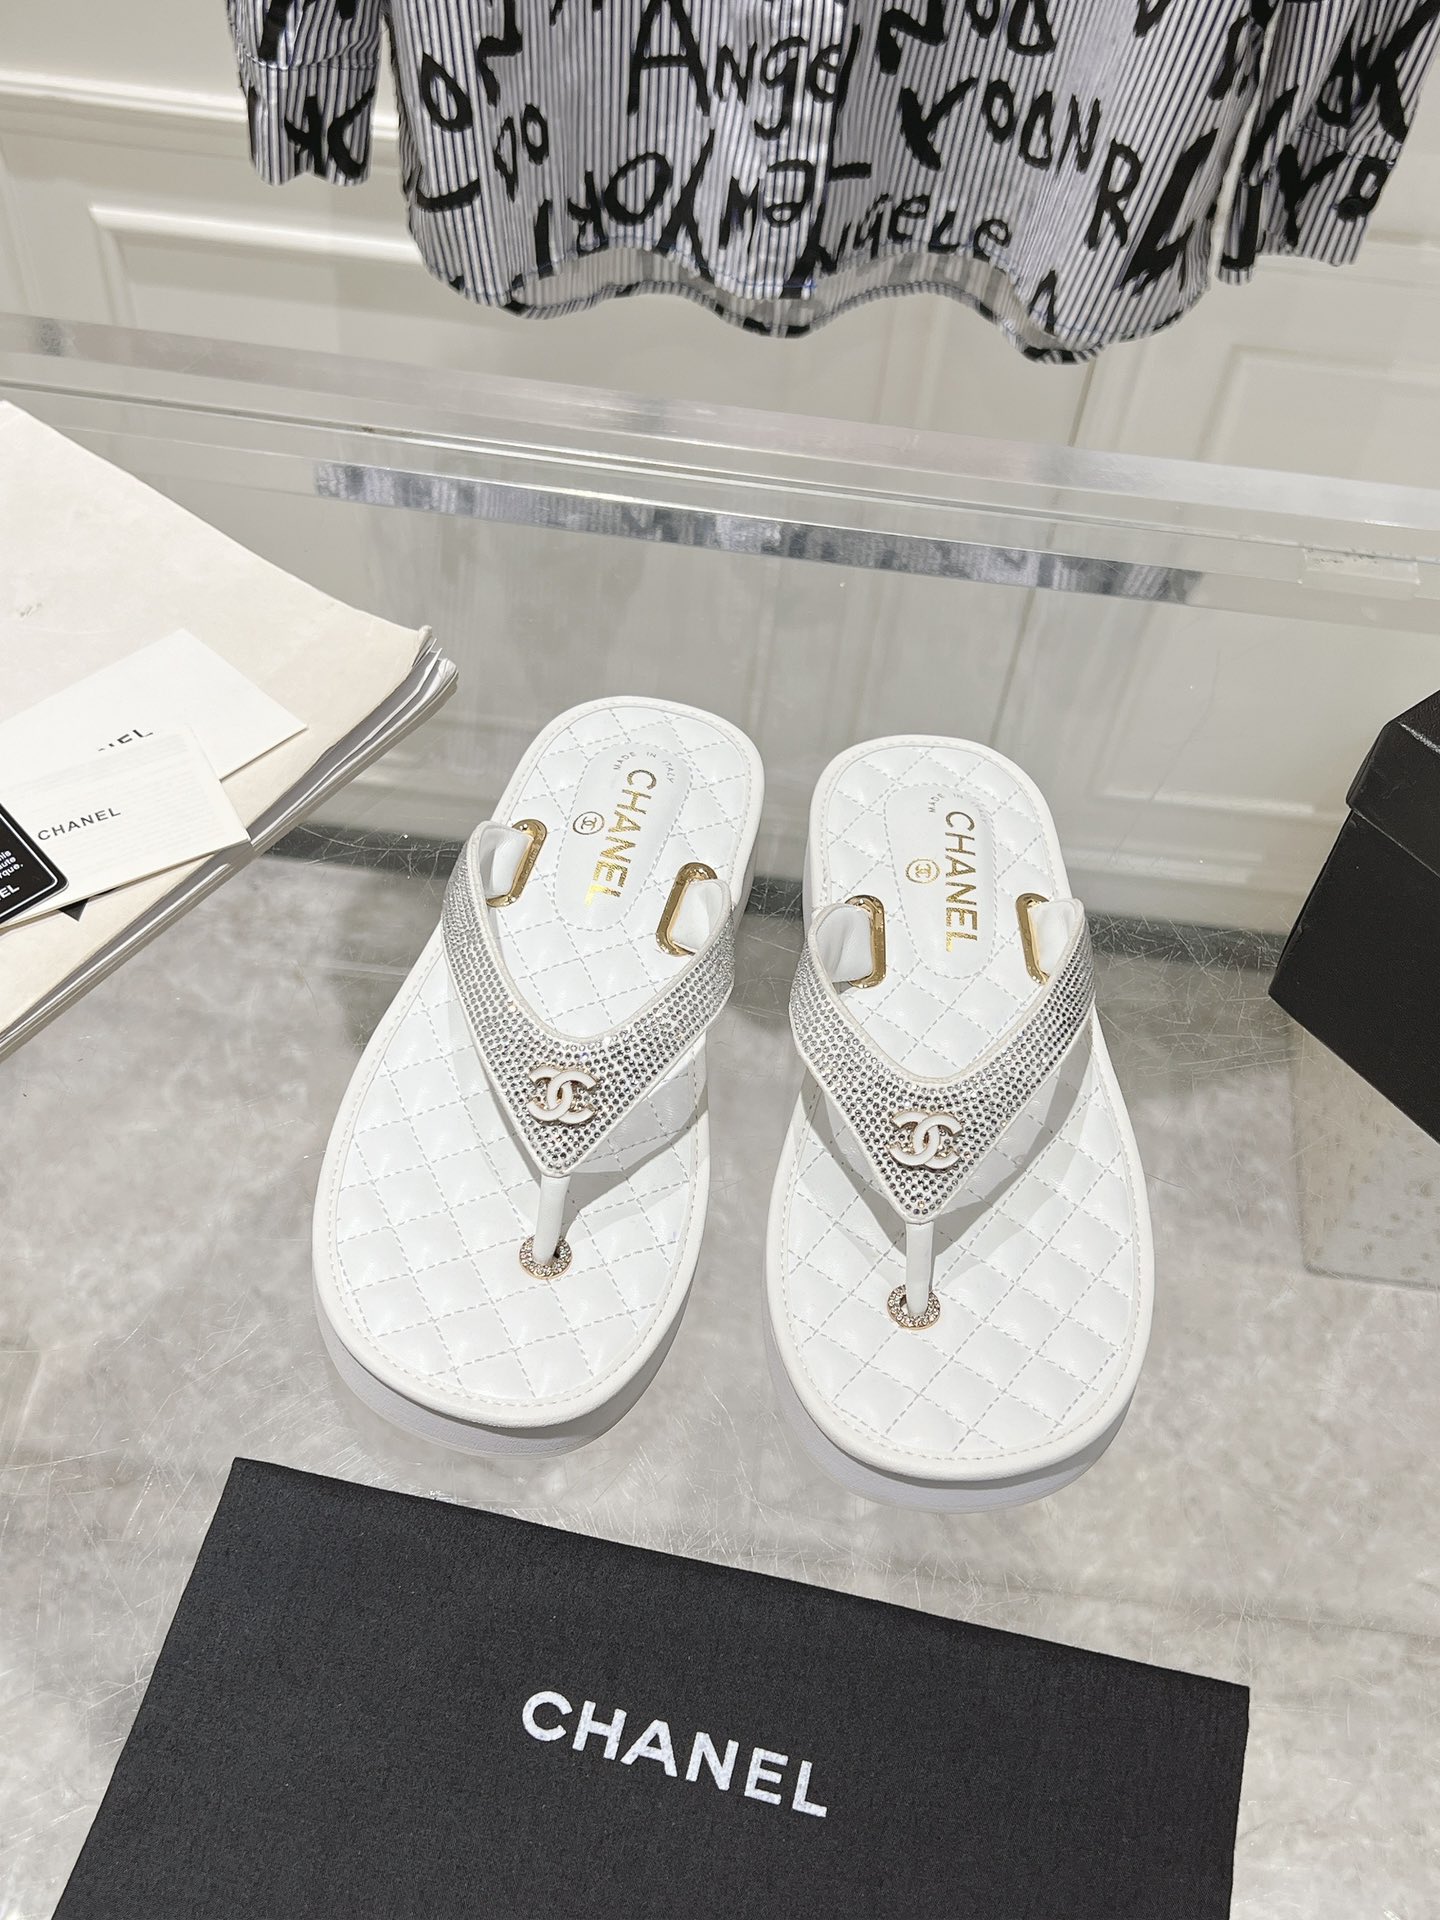 Chanel 7 Star
 Shoes Flip Flops Sandals Slippers Cowhide Spring/Summer Collection